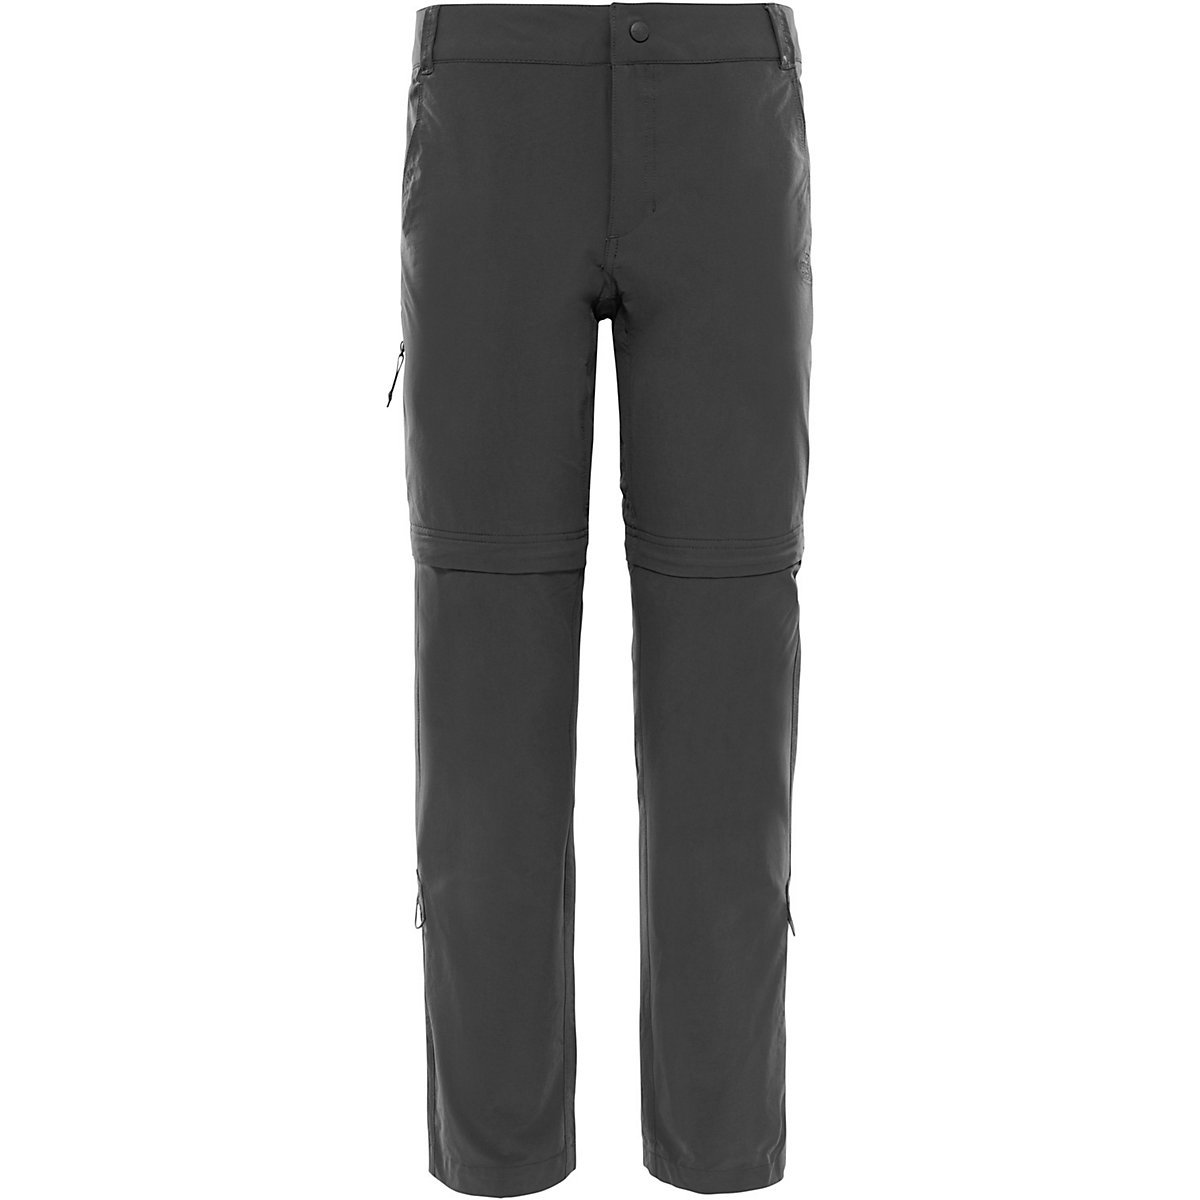 THE NORTH FACE The North Face Cargohose Exploration Convertible im modernen Look Outdoorhosen grau